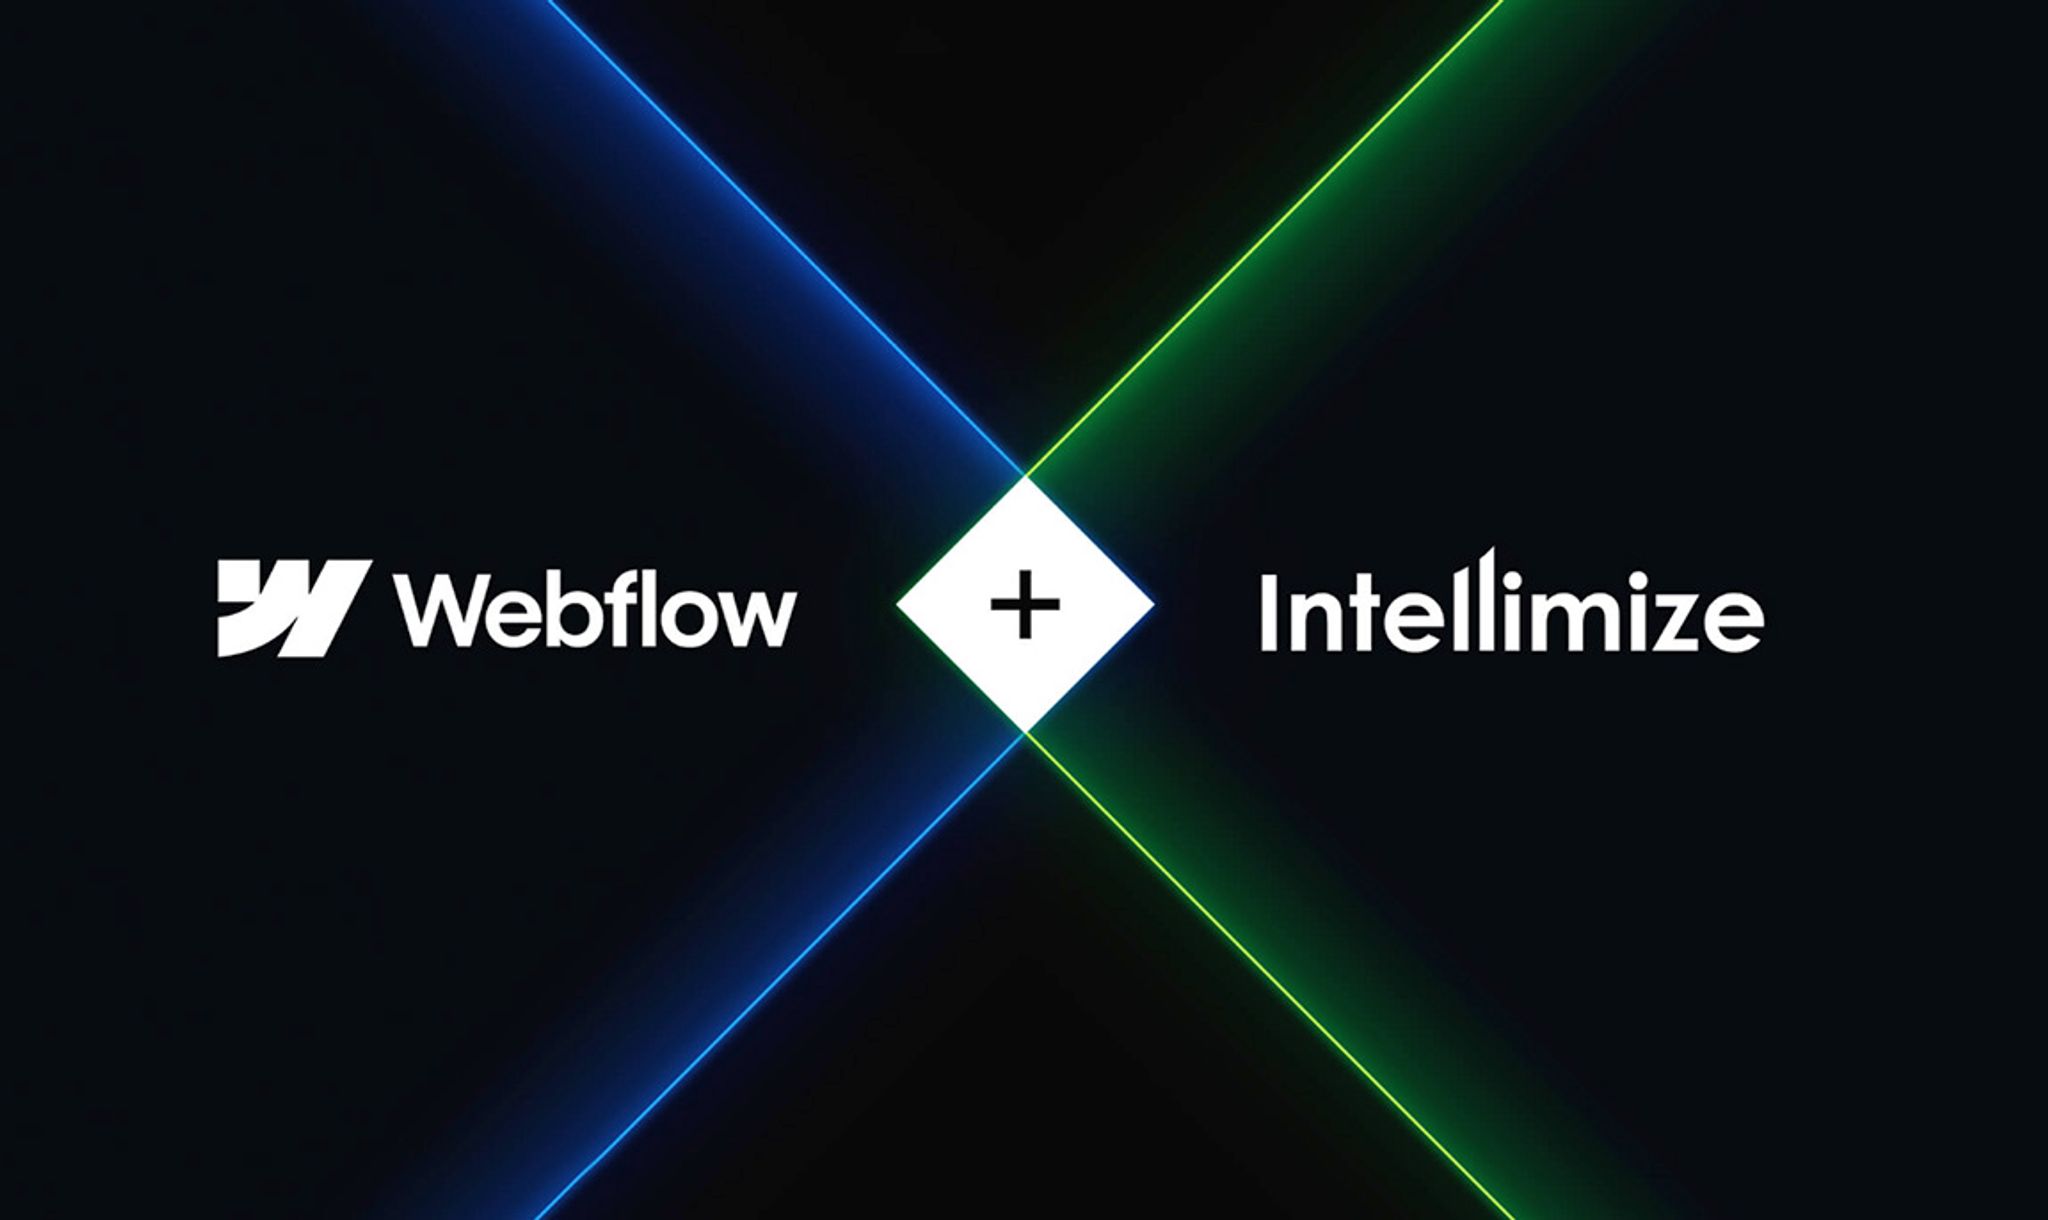 Webflow and Intellimize logos